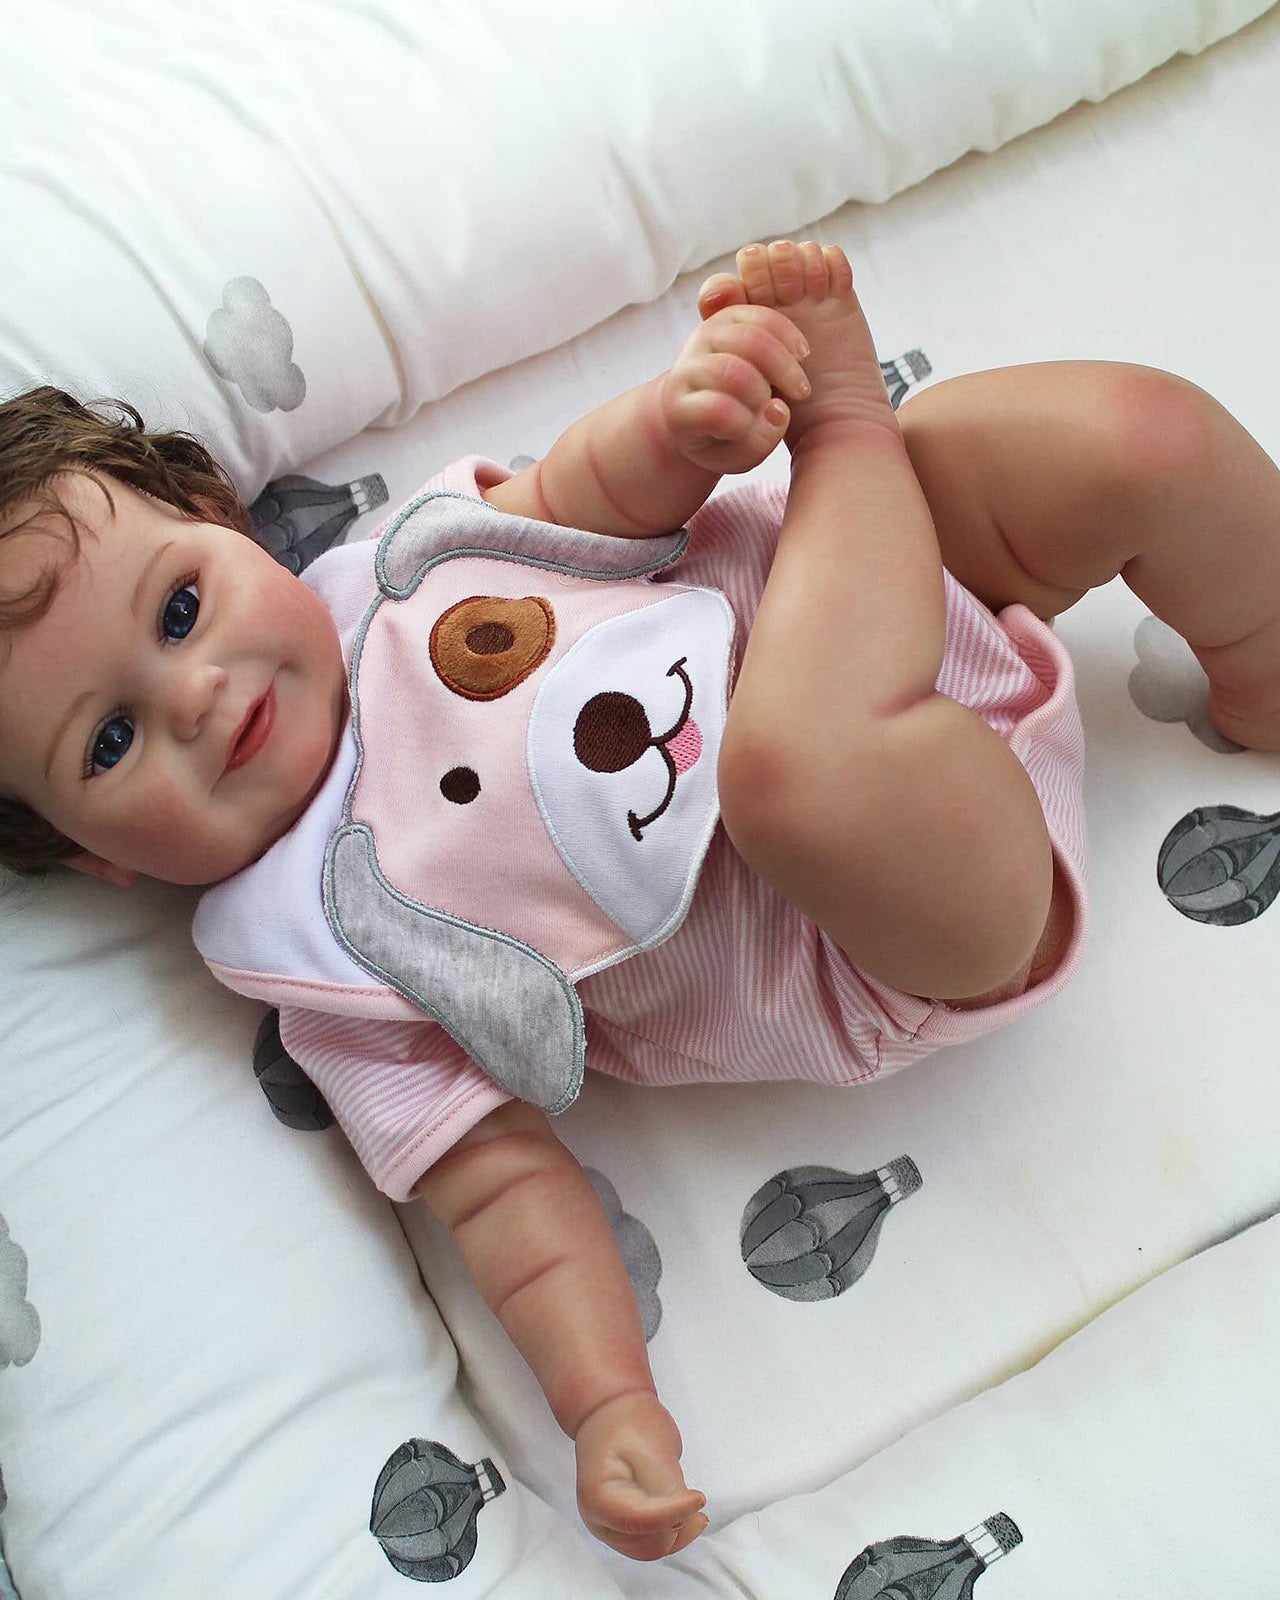 Romy - 20" Reborn Baby Doll Cute And Innocent Newborn Girl with Plump and Chubby Limbs